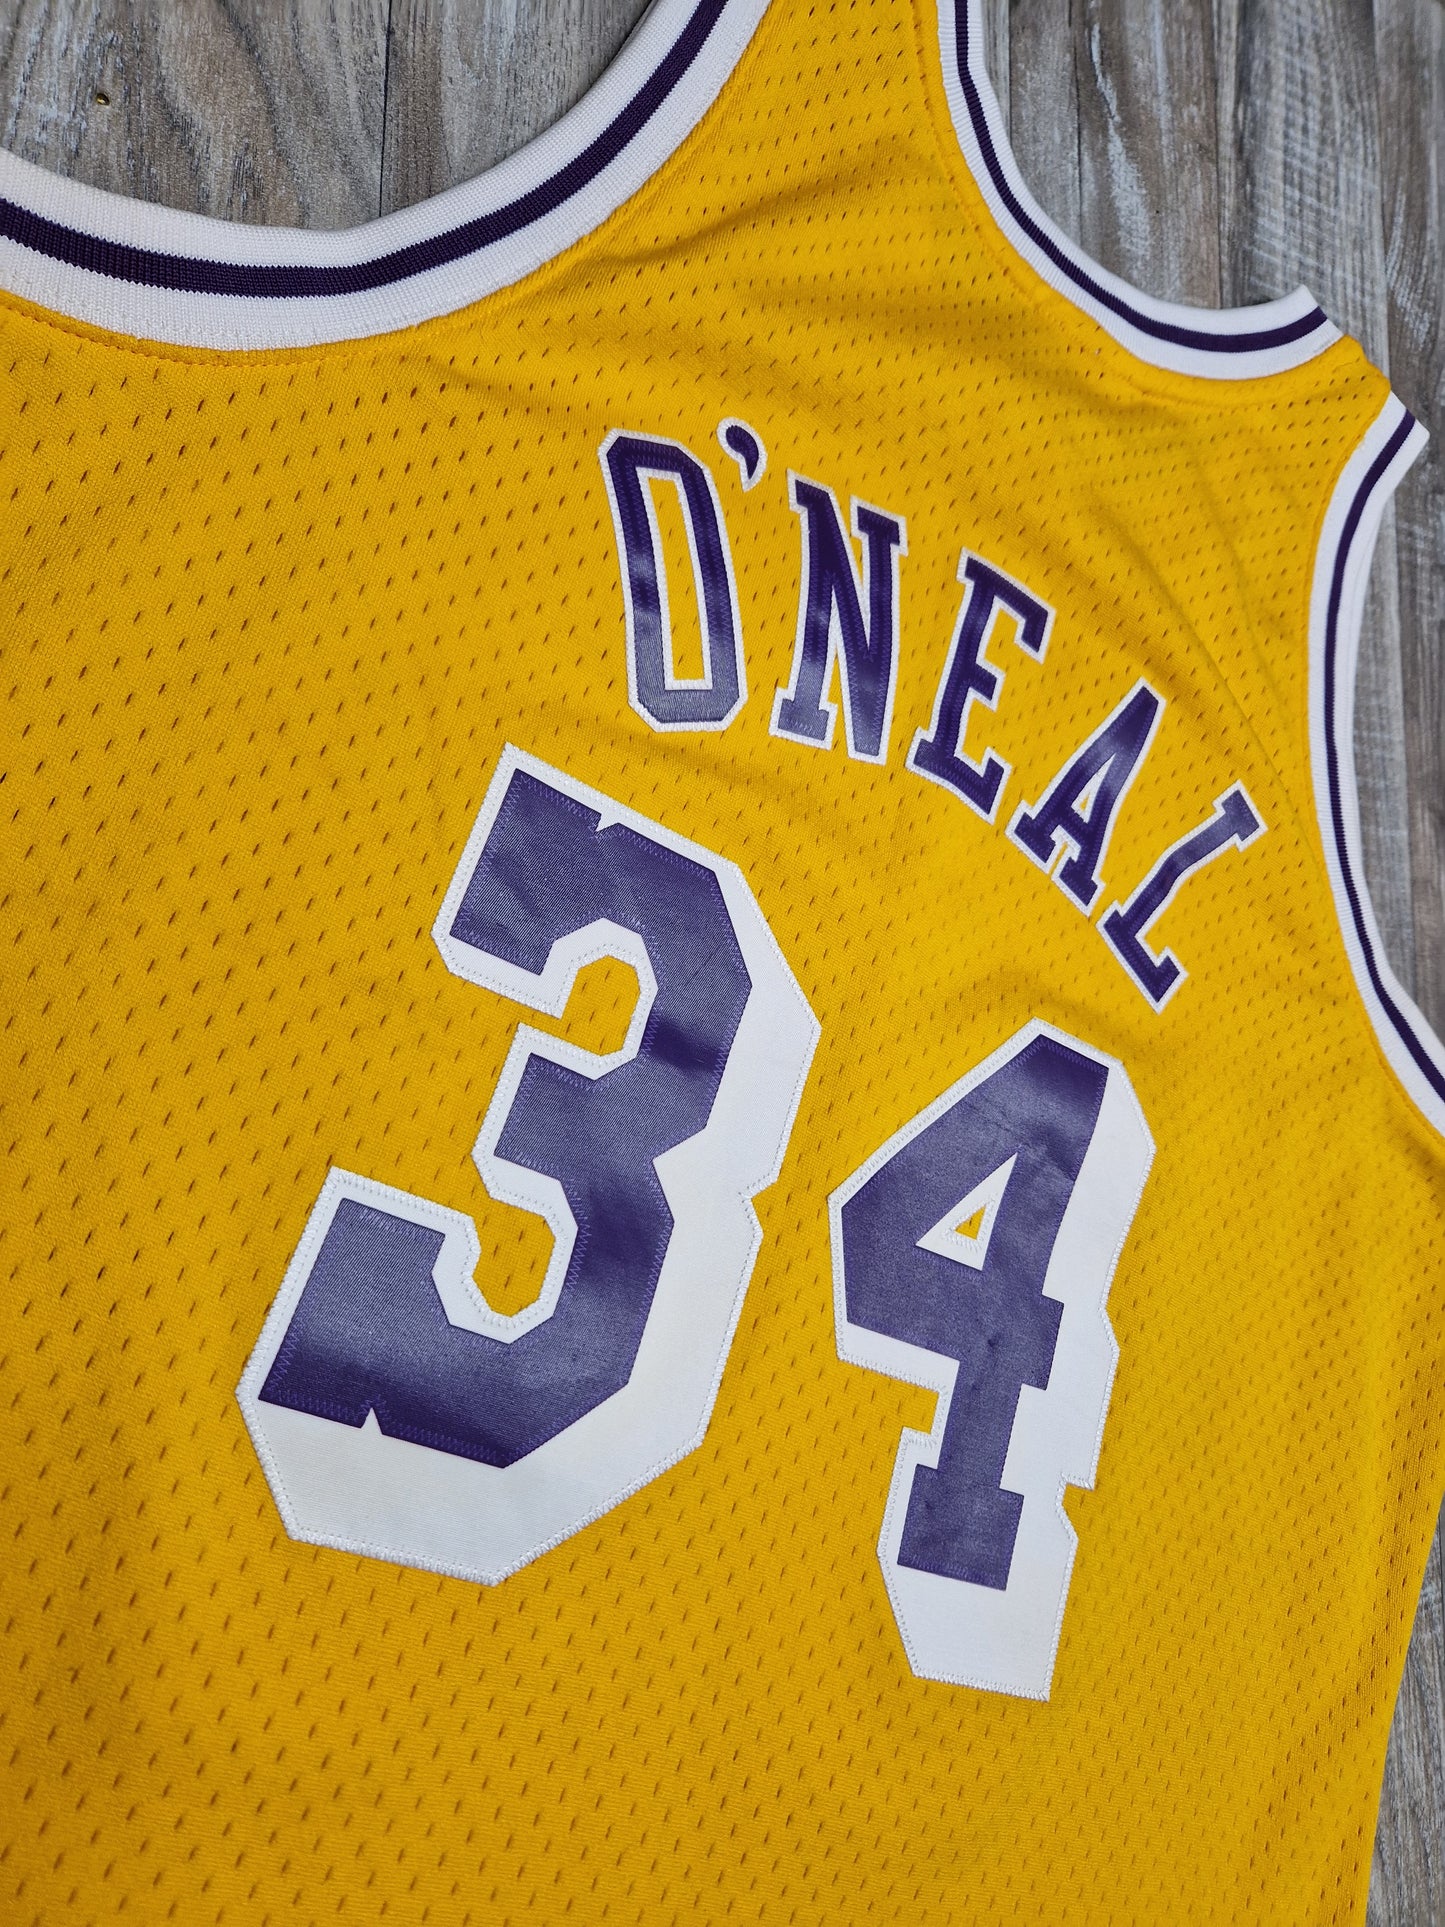 Shaquille O'Neal First Generation Los Angeles Lakers Jersey Size Large